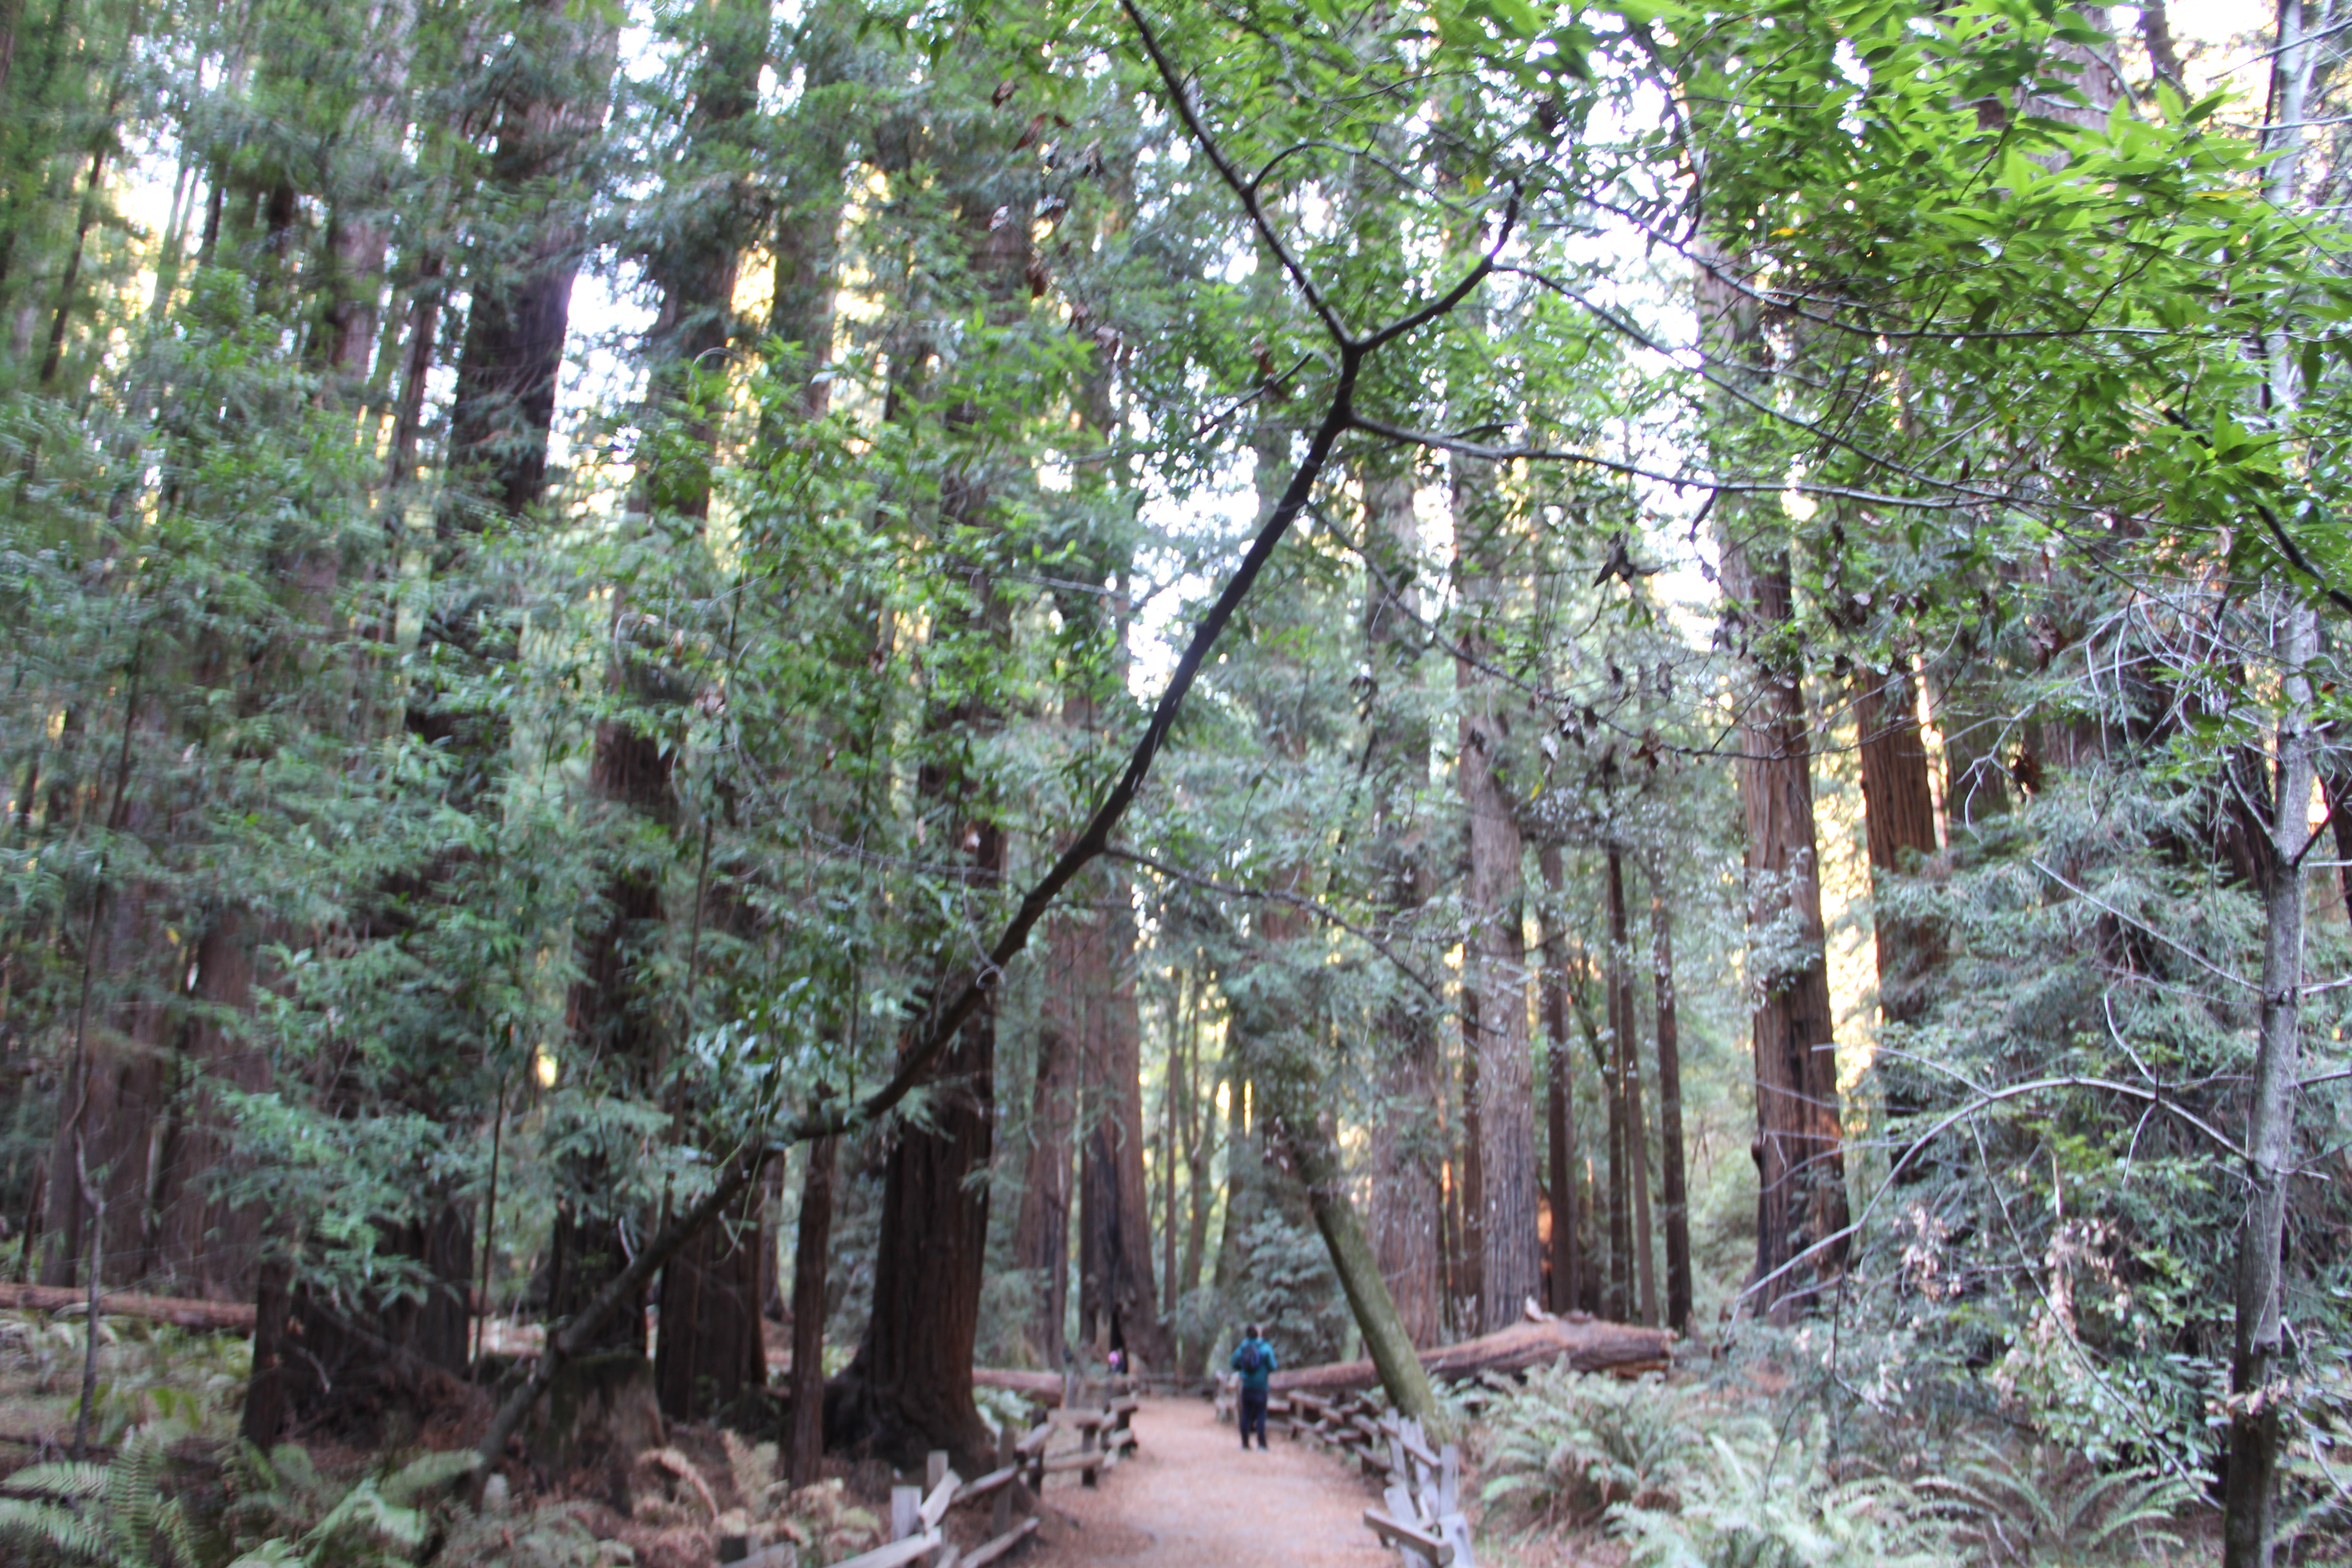 Pathway in Muir Woods showing the human-to-tree scale in the forest.